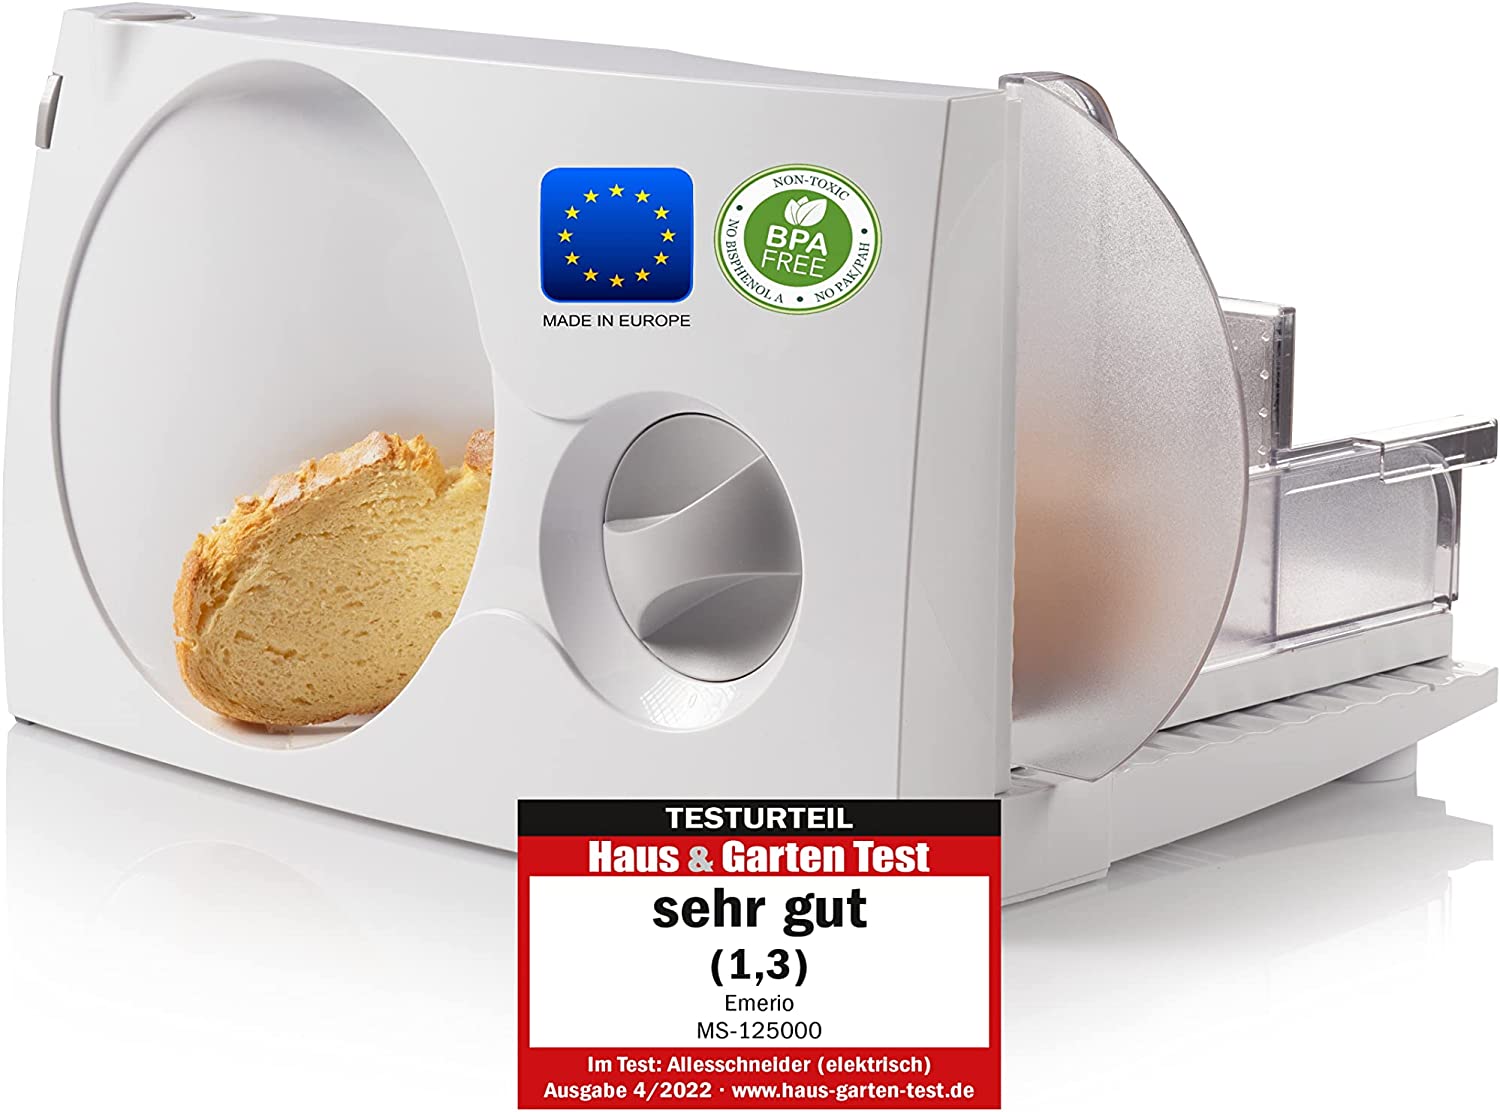 Emerio All-Purpose Slicer, Made in the EU, MS-125000, Stainless Steel Blade Unit Produced in Germany, Adjustable 0-17 mm, BPA-Free, Space-Saving Foldable, with Safety Switch, Eco 100 Watt